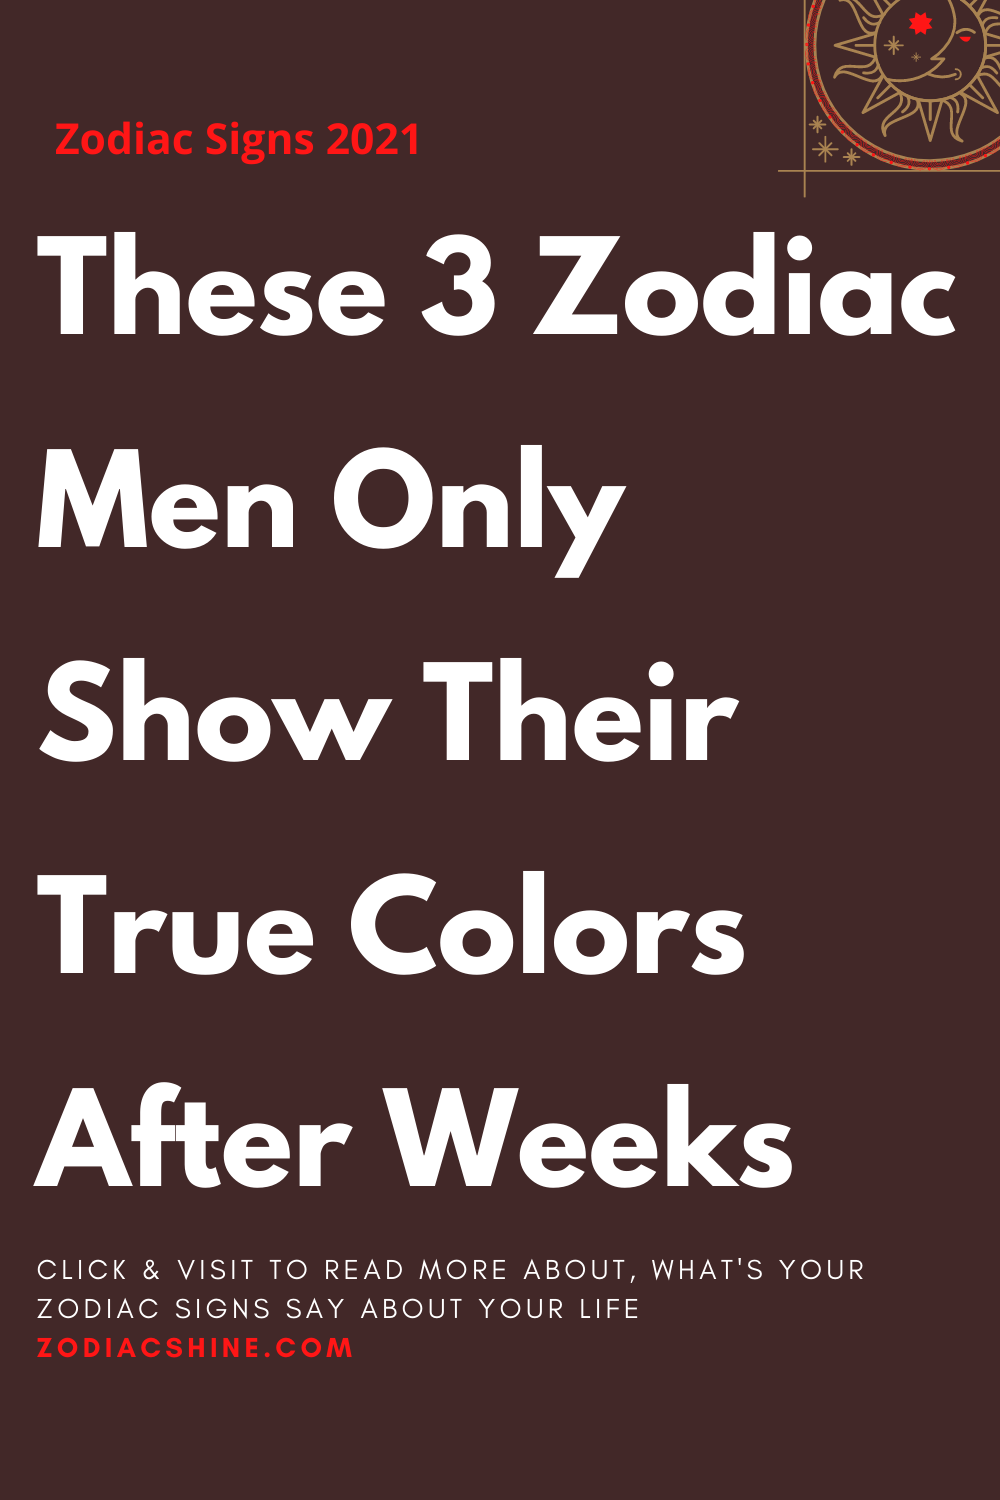 These 3 Zodiac Men Only Show Their True Colors After Weeks